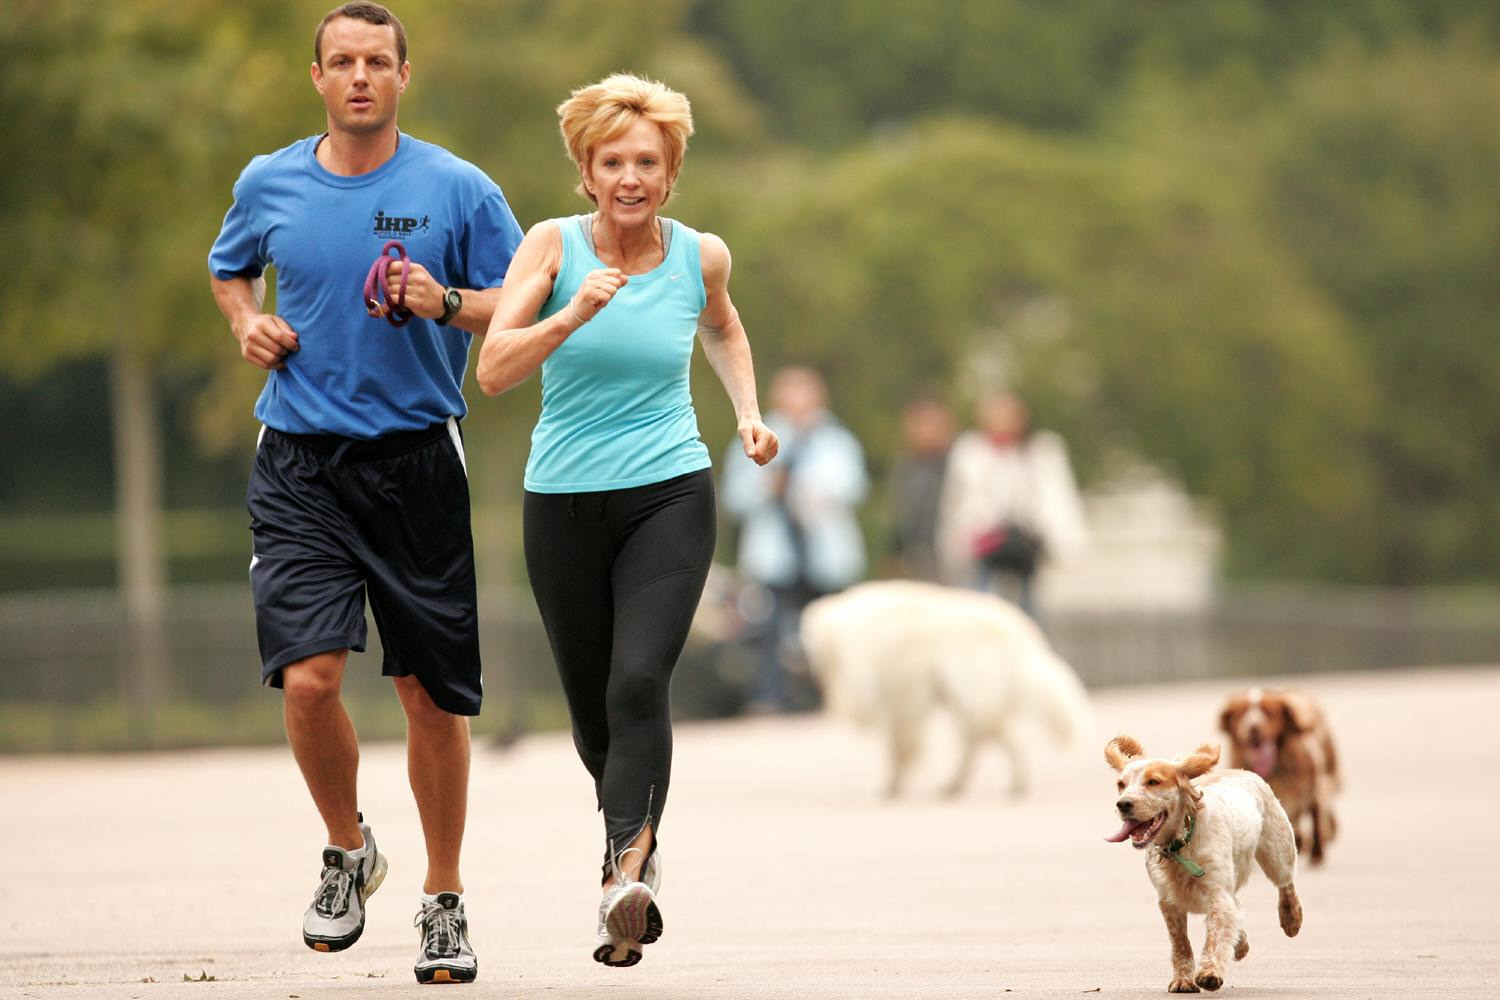 Anne Robinson, jogging with her personal trainer and dog (2007) (Terry Richards/PA)